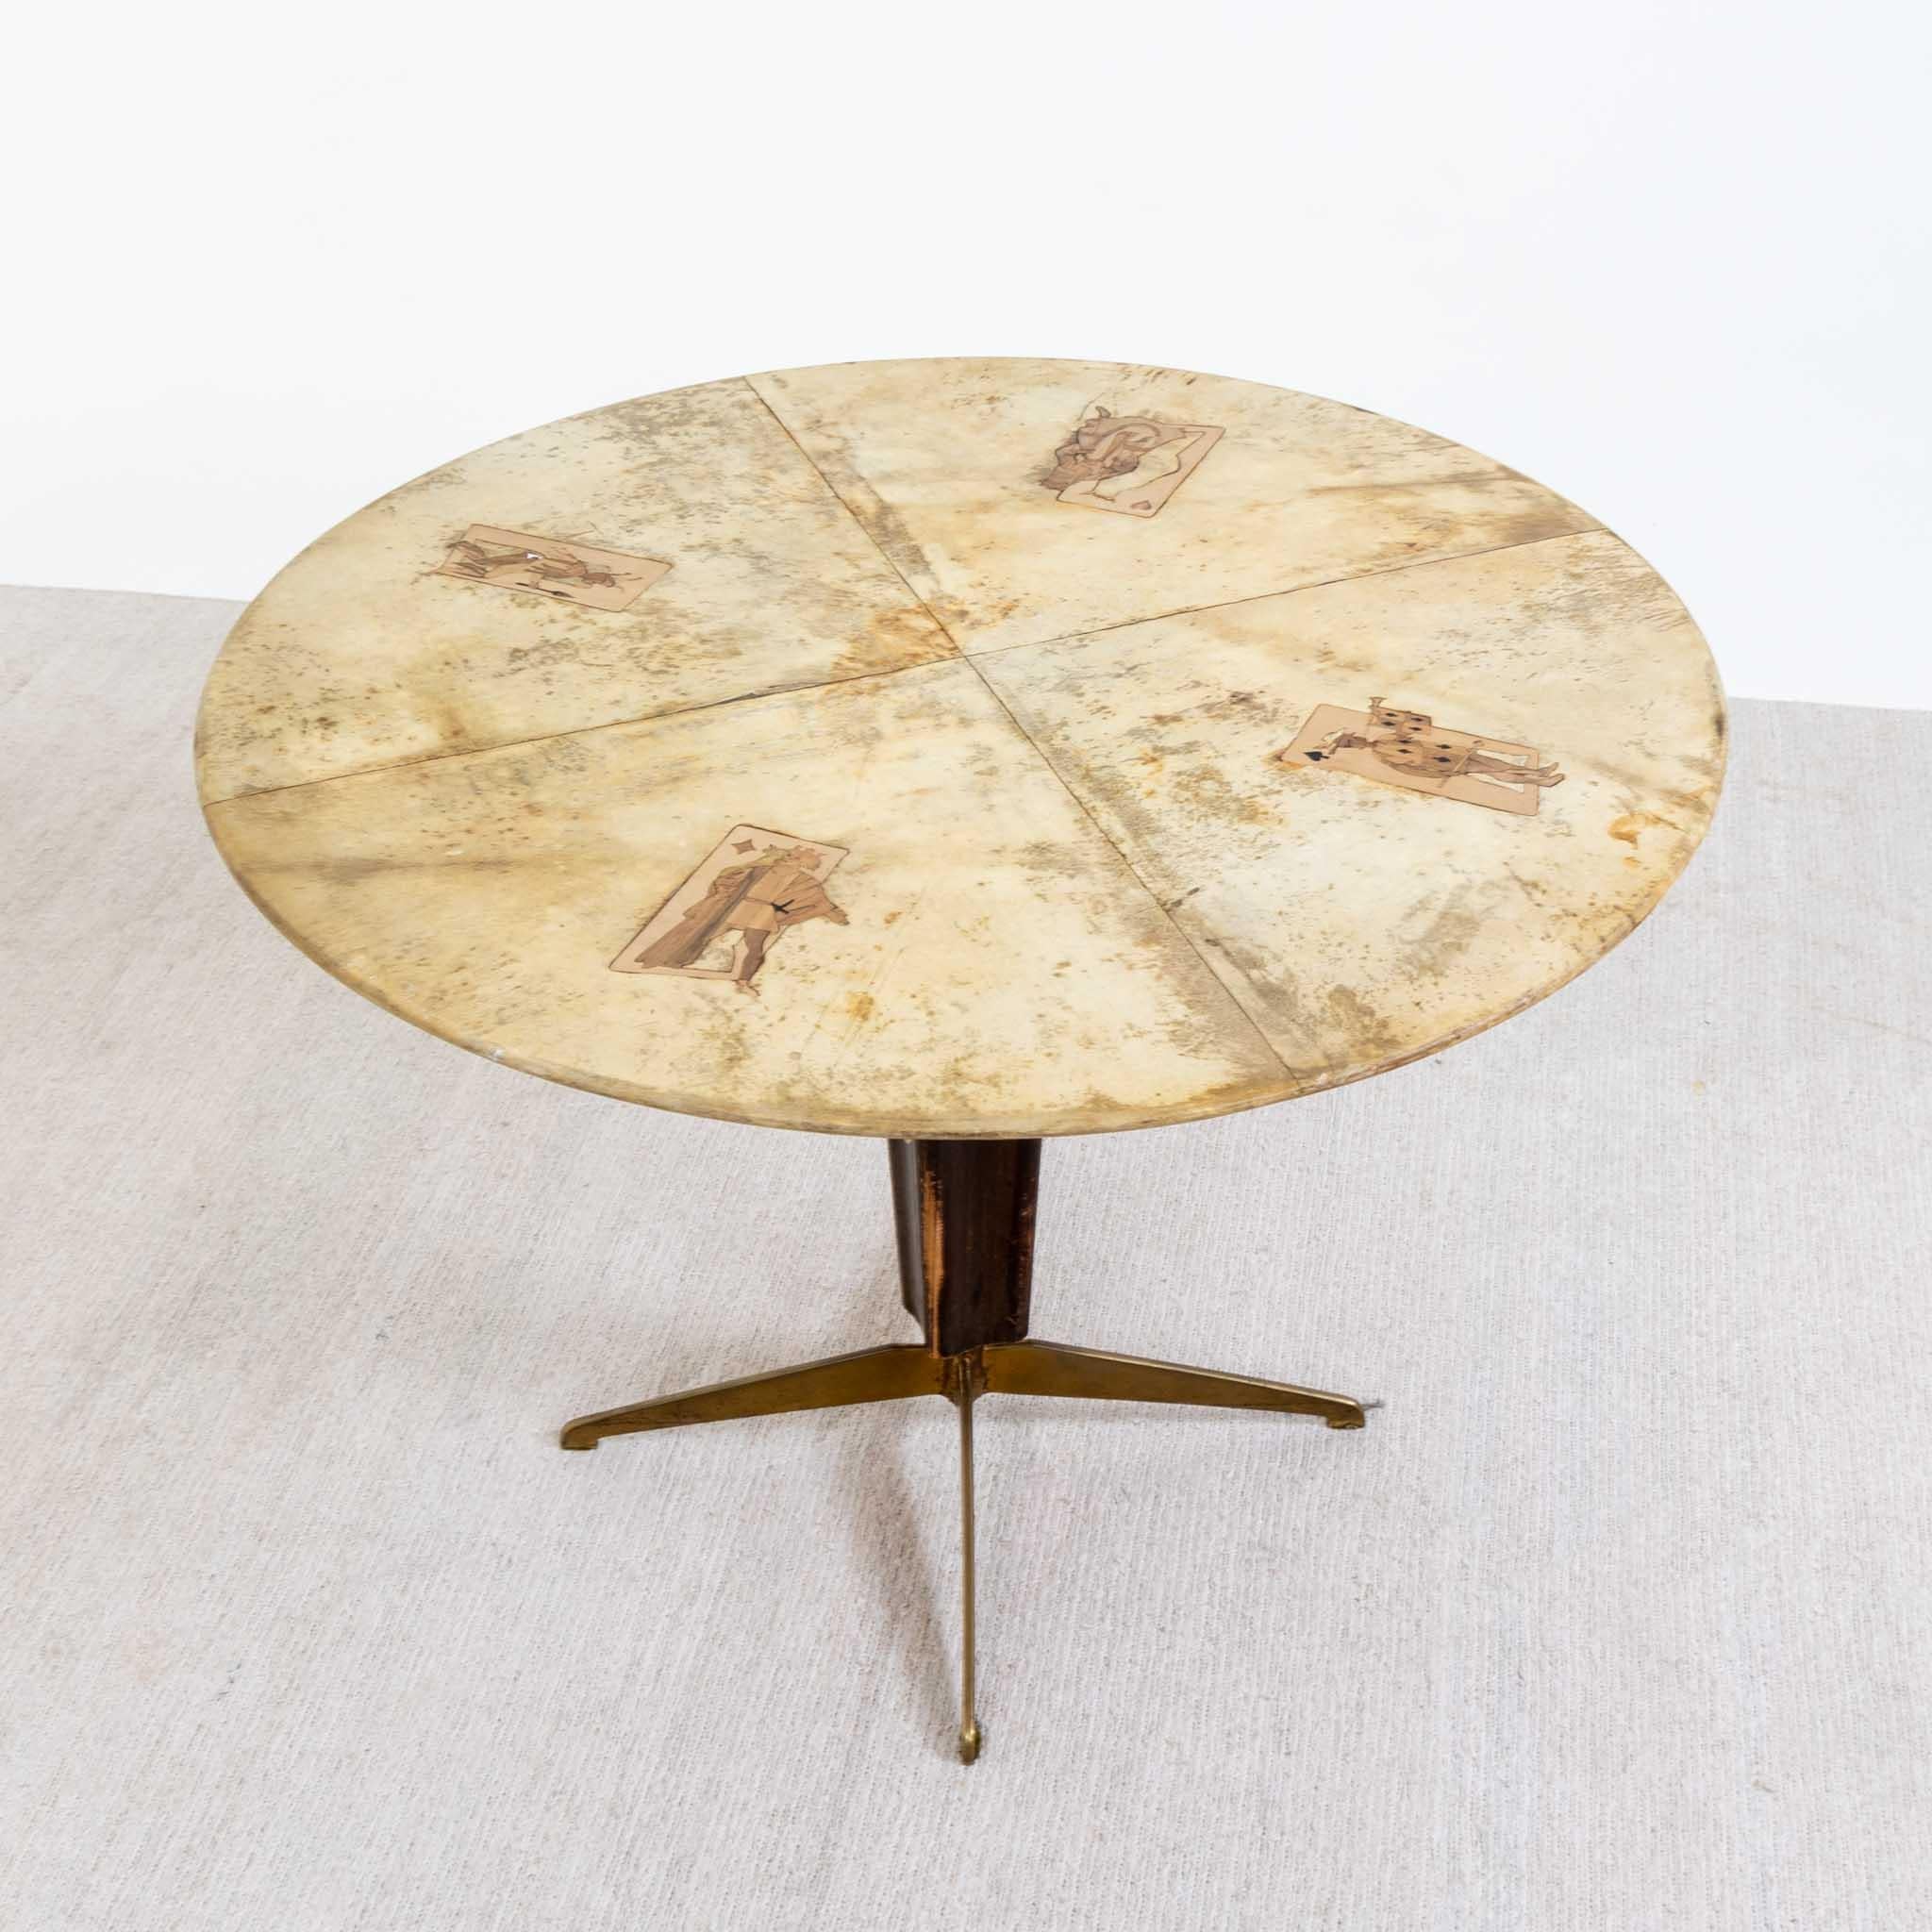 Parchment center table with wood marquetry inlay in a playing card motif. 
Brass base with mahogany wood support.